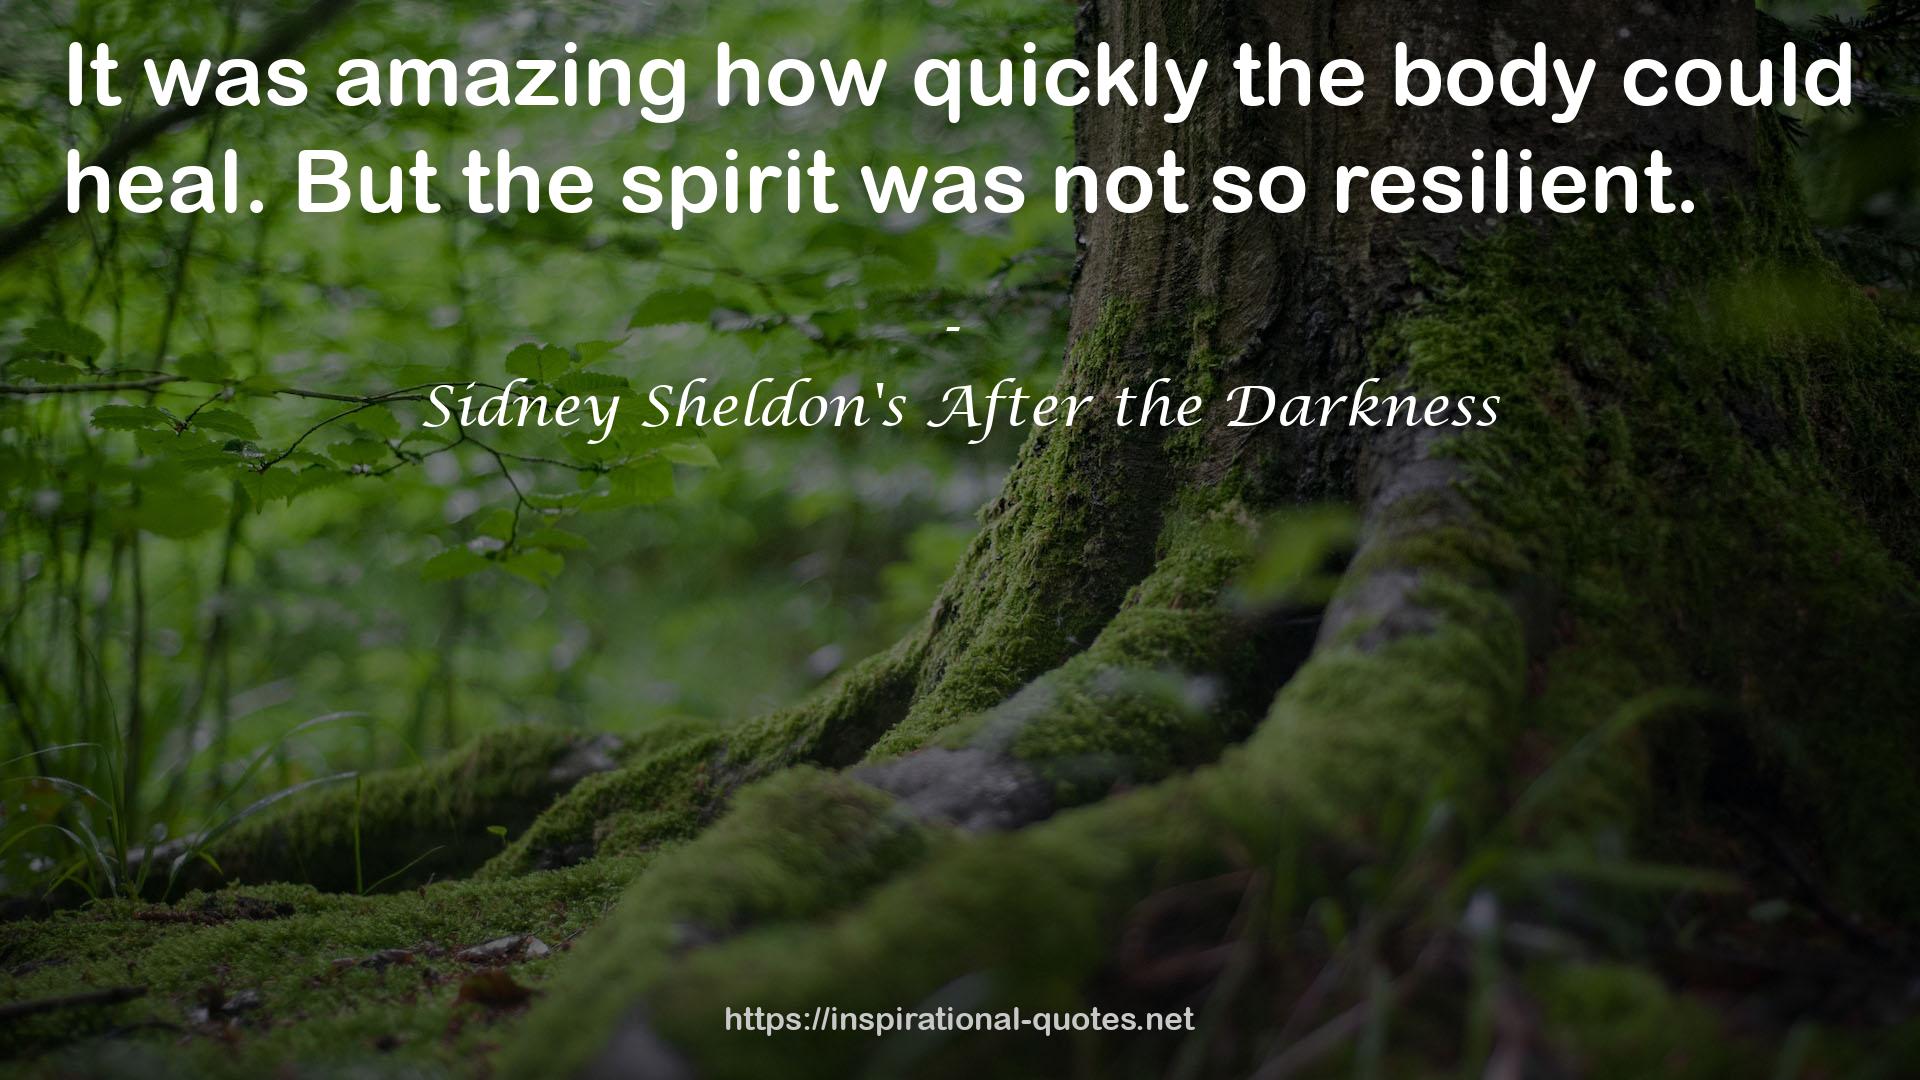 Sidney Sheldon's After the Darkness QUOTES